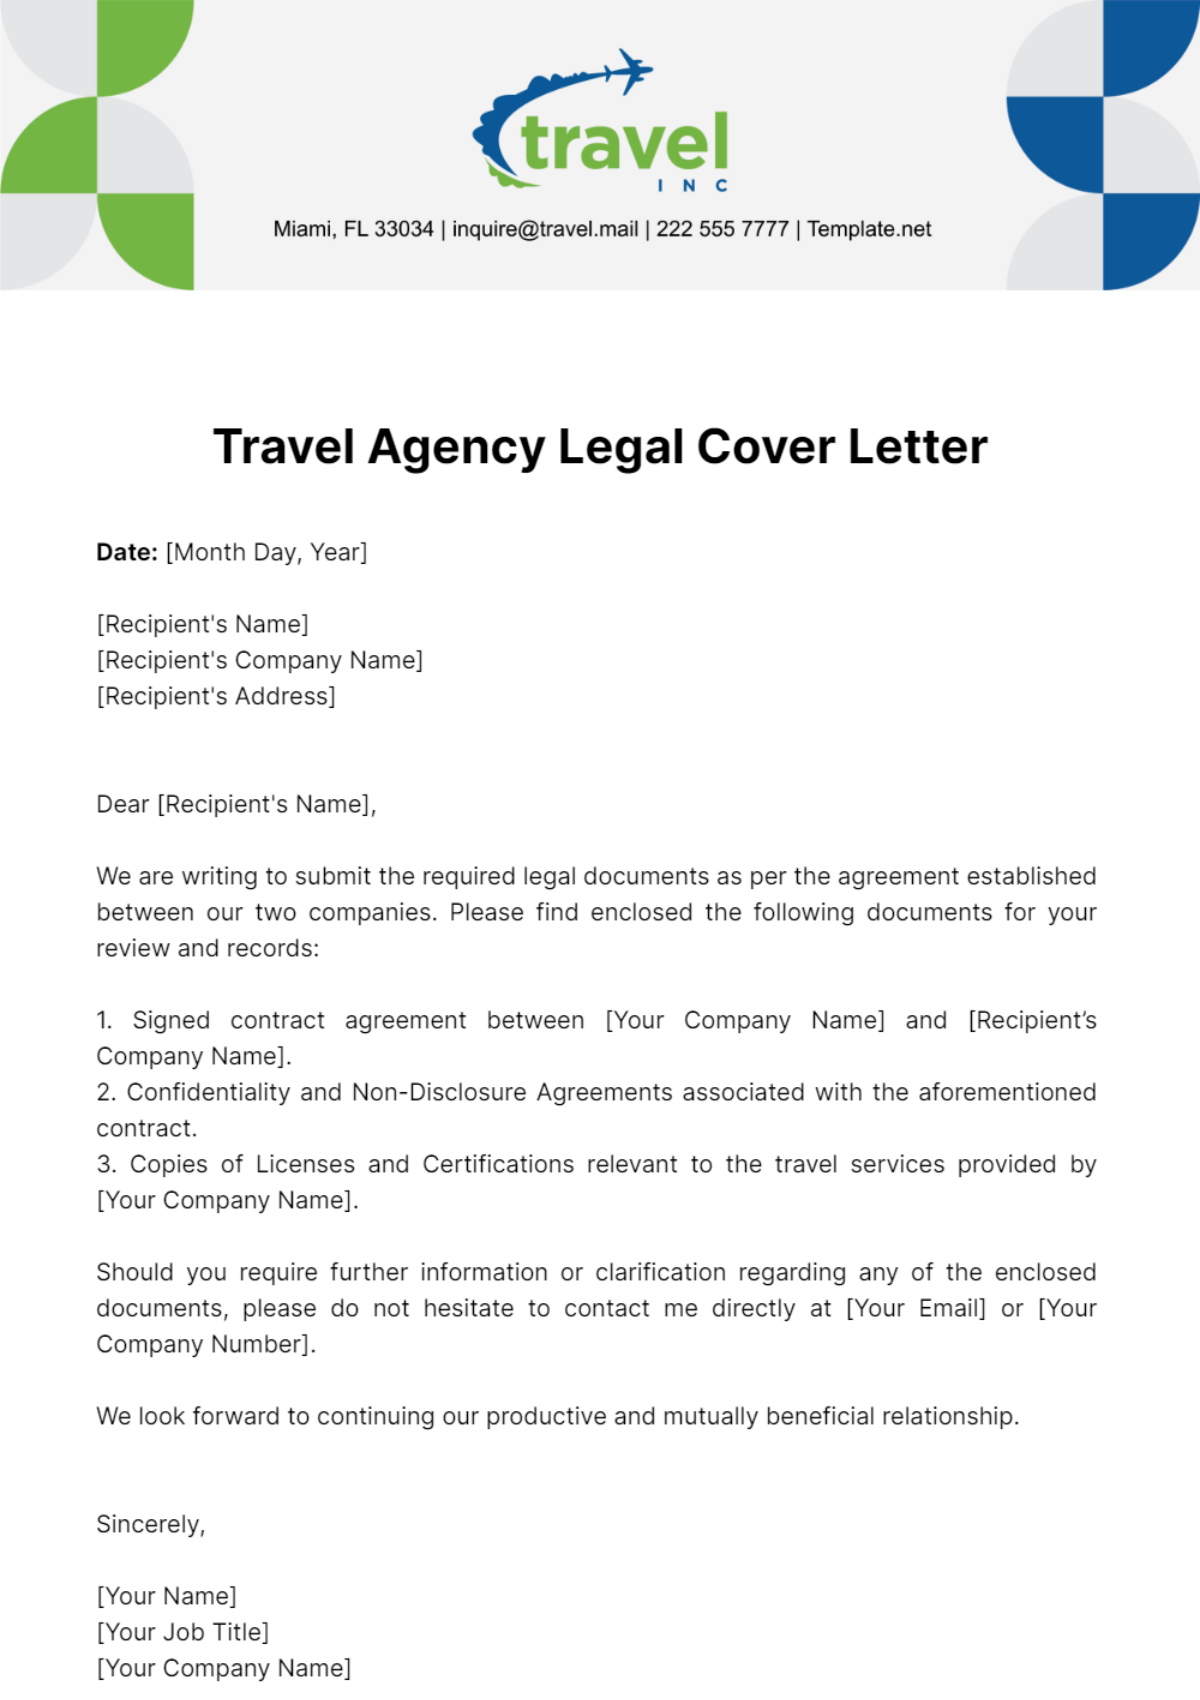 Free Travel Agency Legal Cover Letter Template